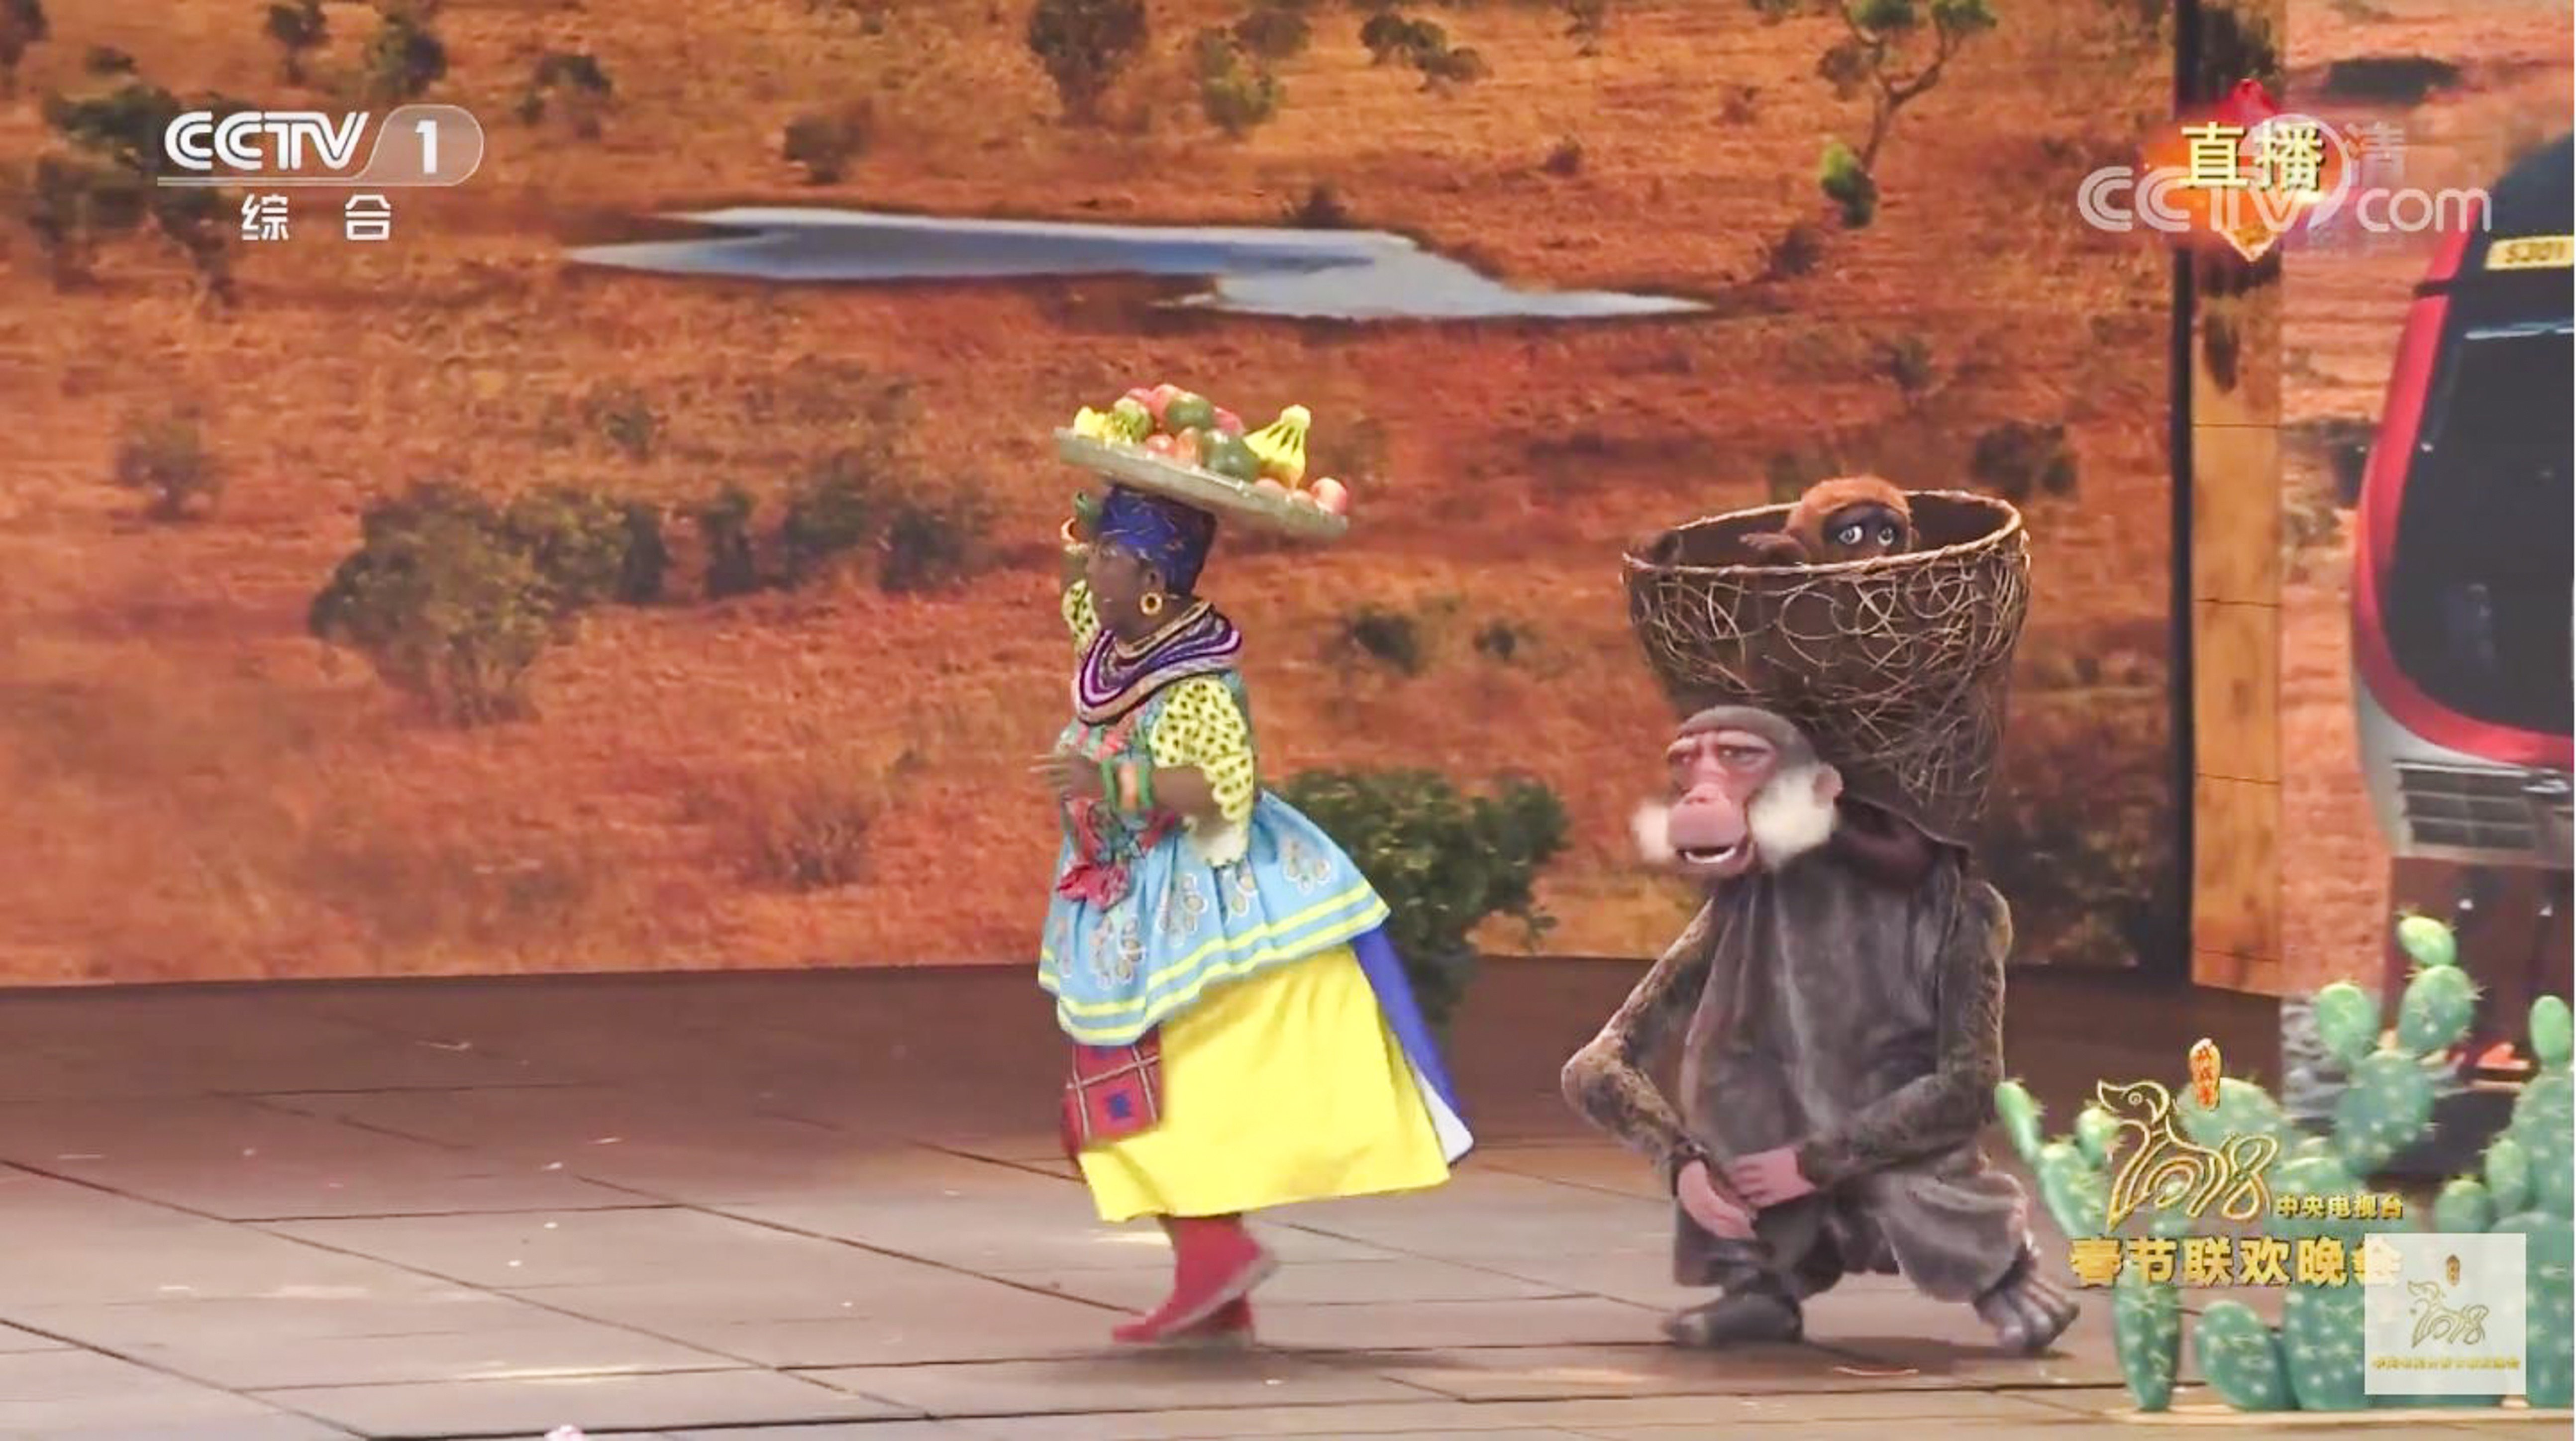 A Chinese actress in blackface does an exaggerated impression of an African woman, alongside her sidekick, a monkey, in Chinese state broadcaster CCTV’s Spring Festival Gala in February 2018. The depiction sparked a global debate on China’s attitudes to racism. Image: CCTV via YouTube